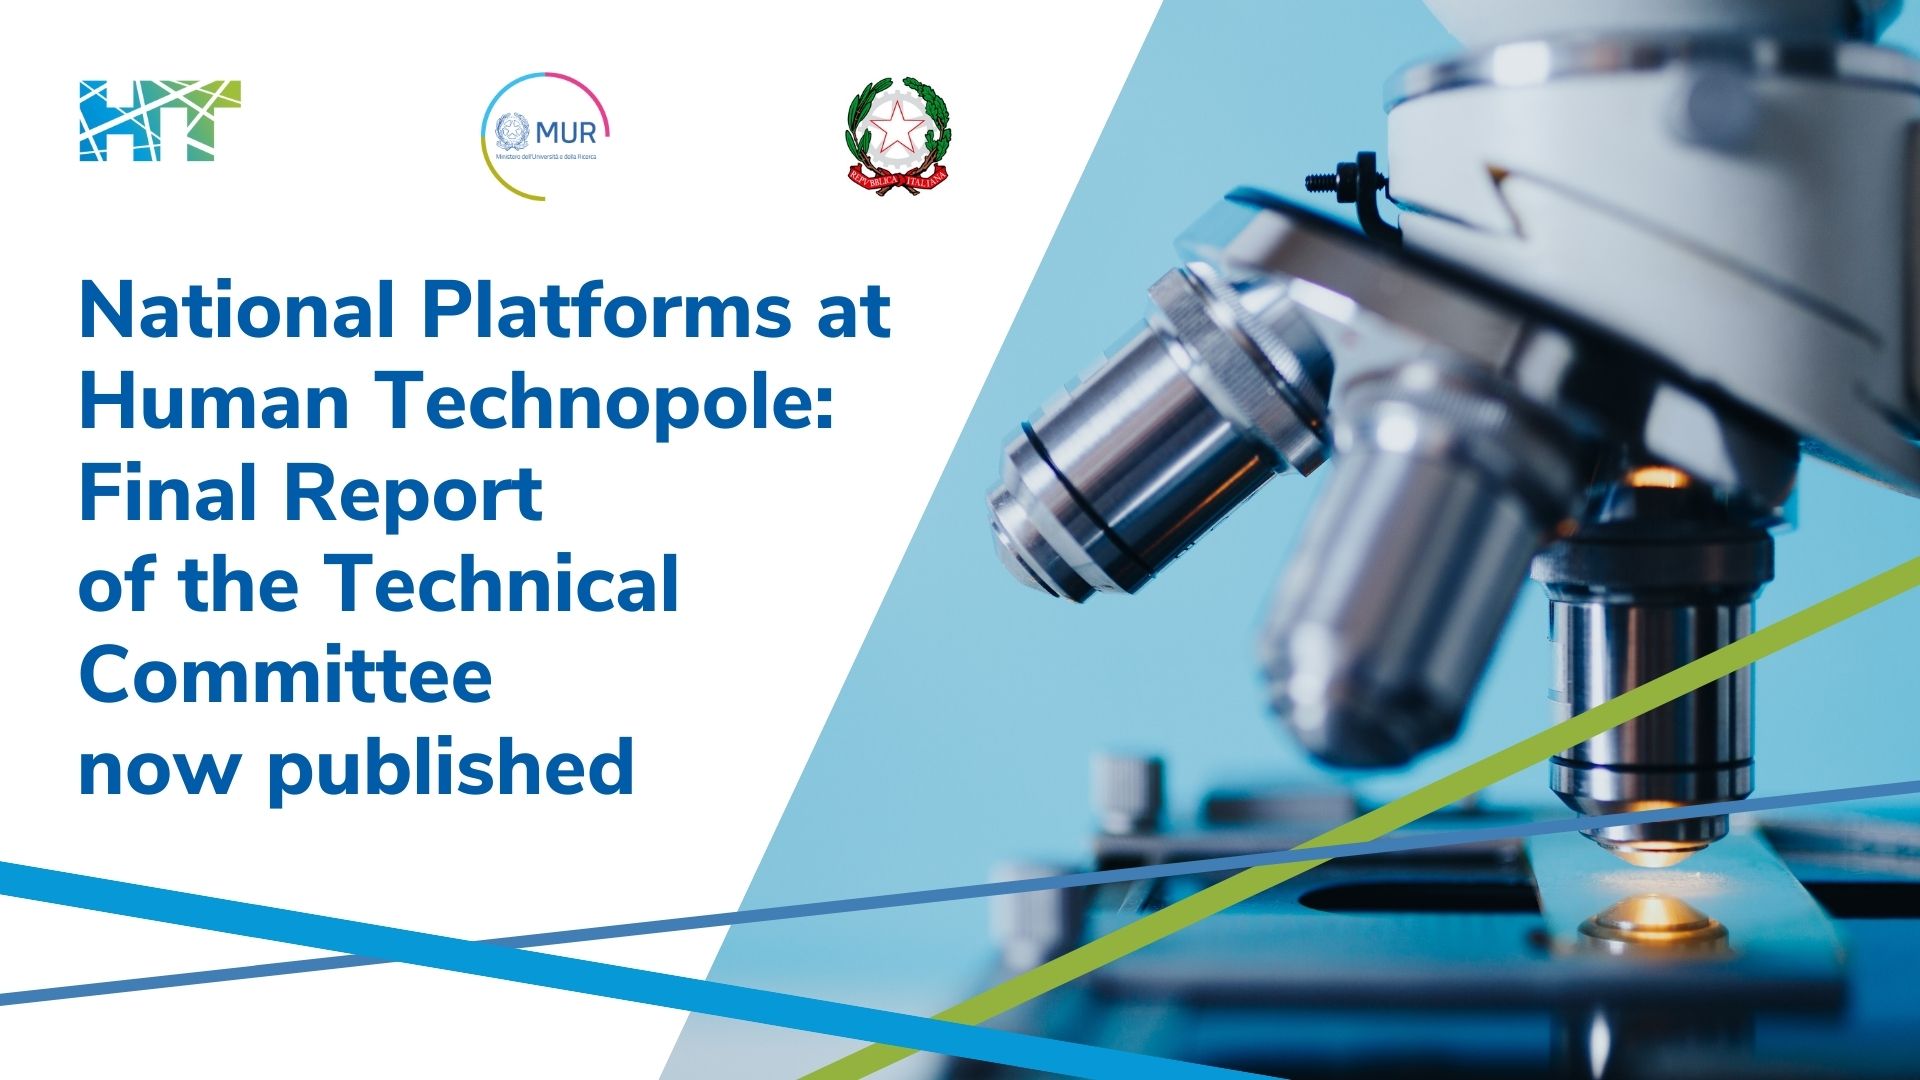 National Platforms at Human Technopole: Final Report of the Technical Committee now published